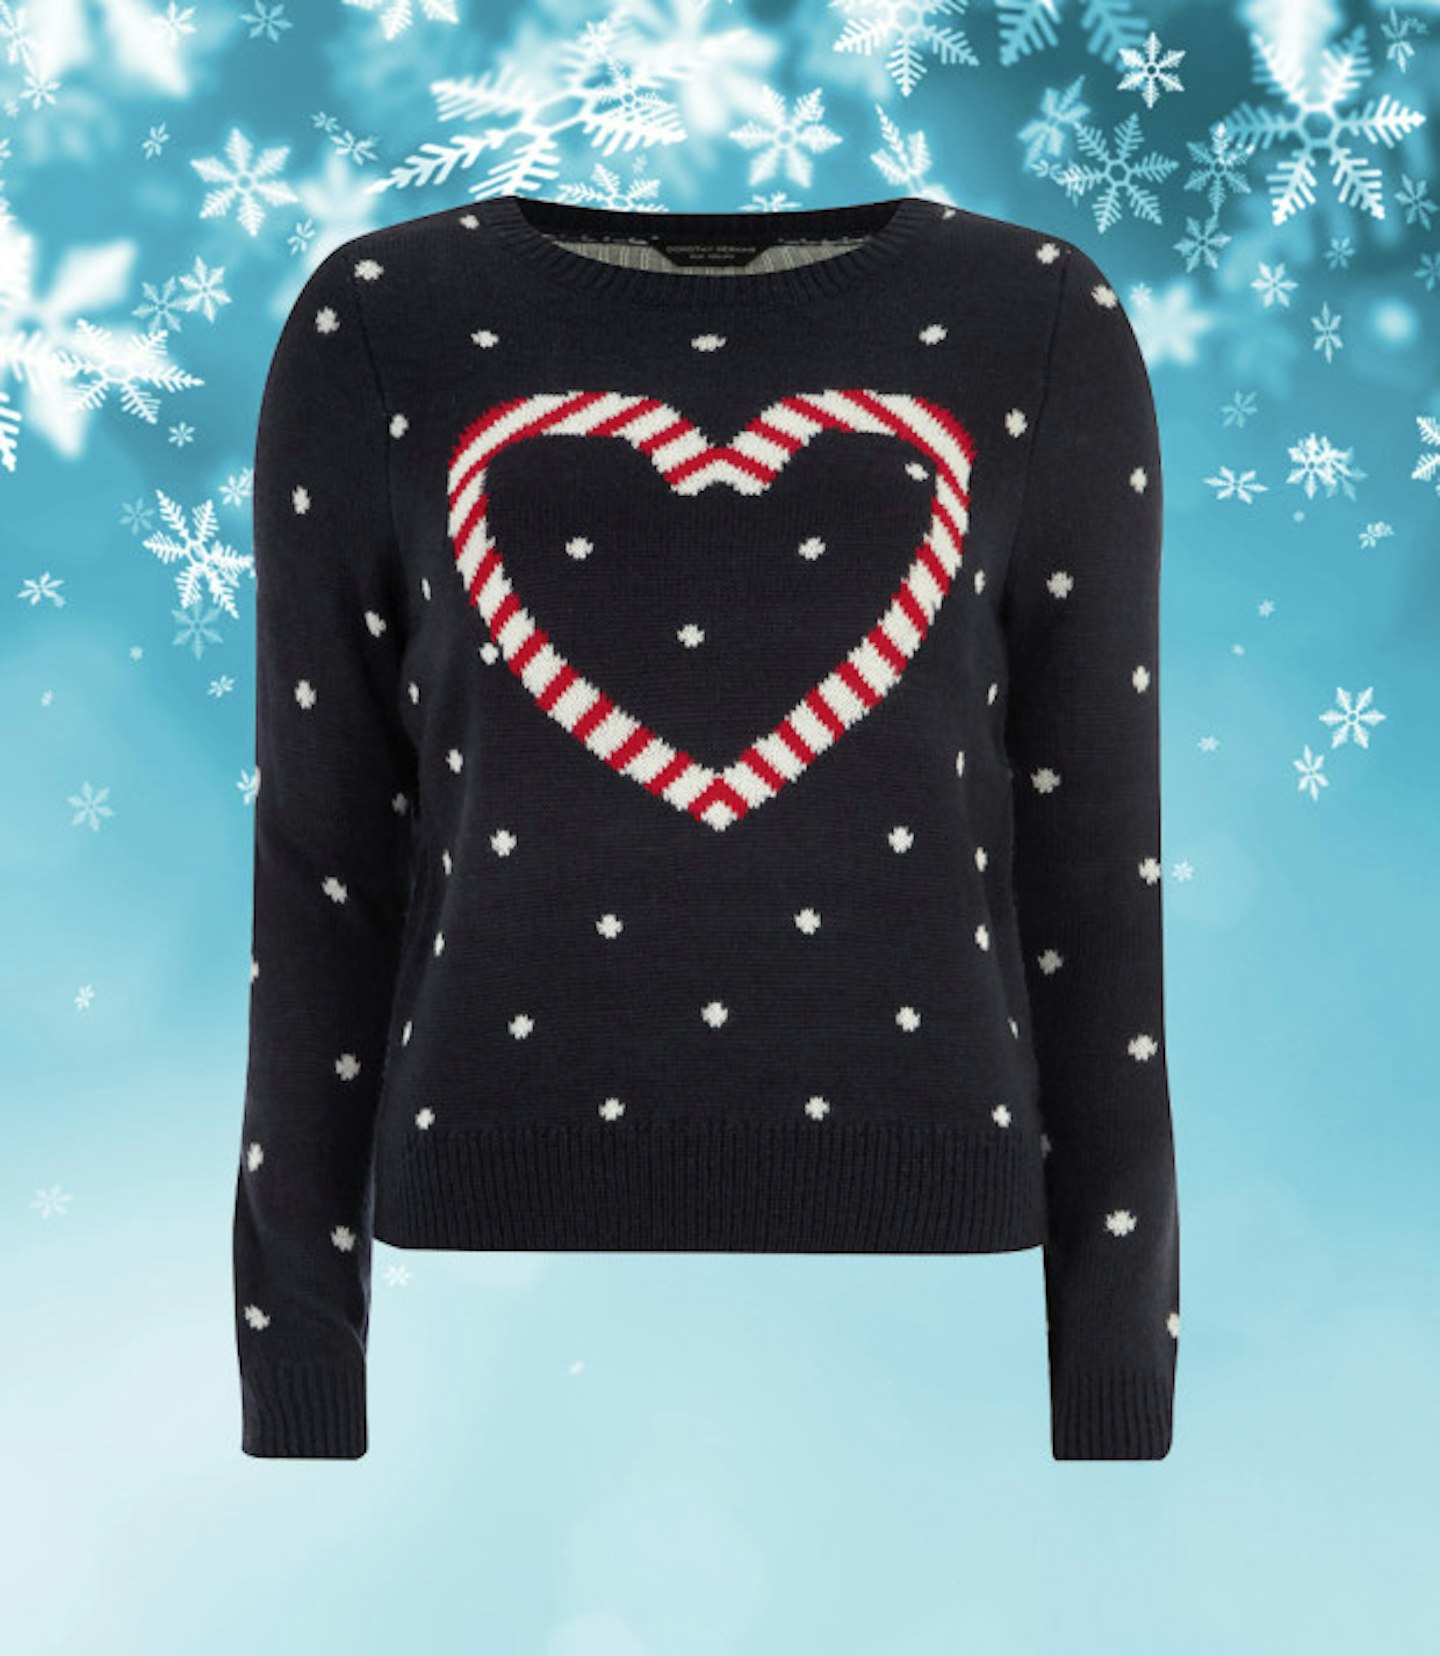 christmas-jumpers-dorothy-perkins-navy-candy-cane-heart-spot